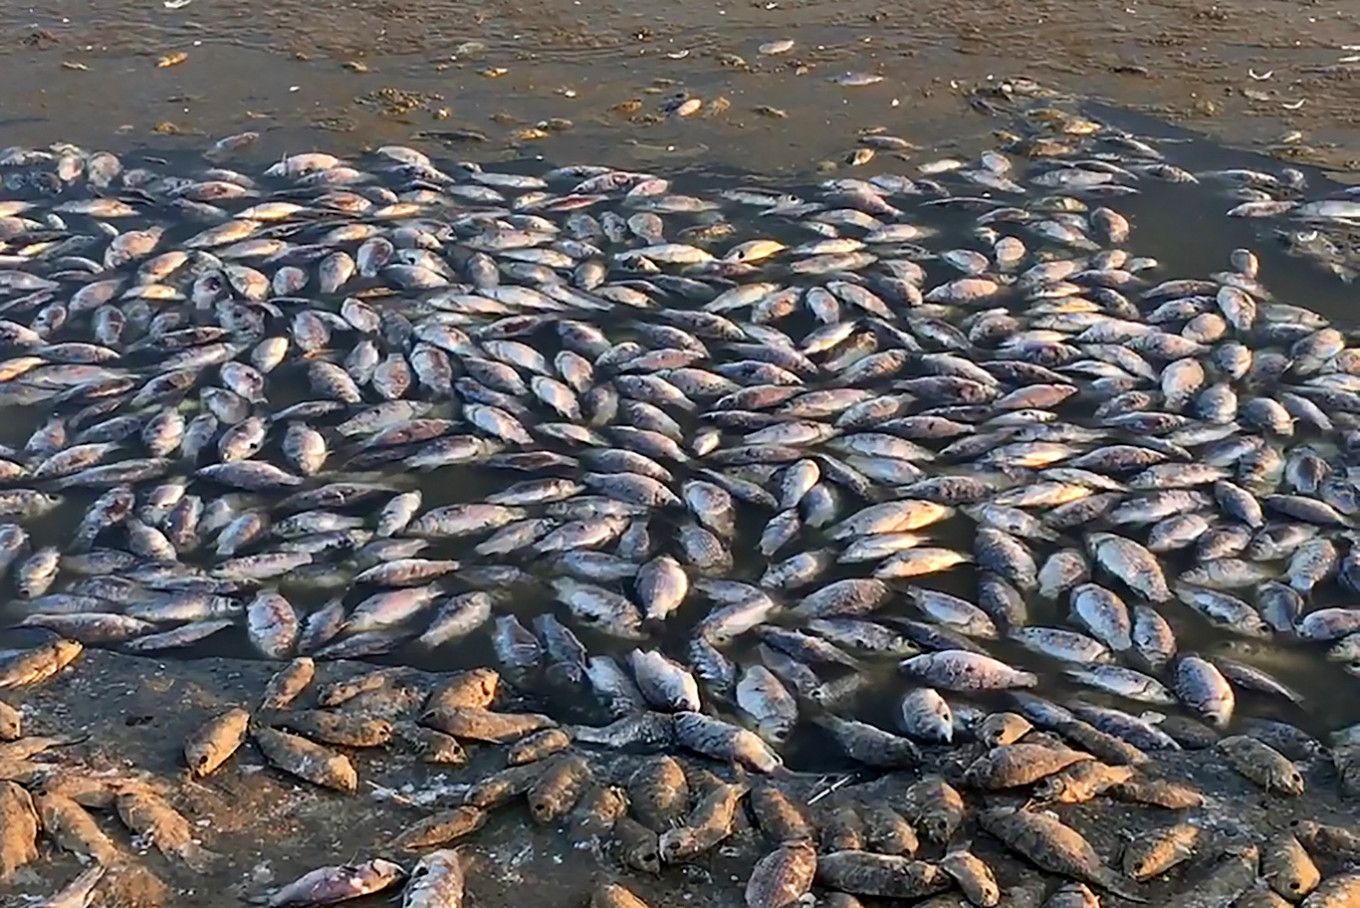 Mass Fish Die-Off in Southern Russia Sparks Probe